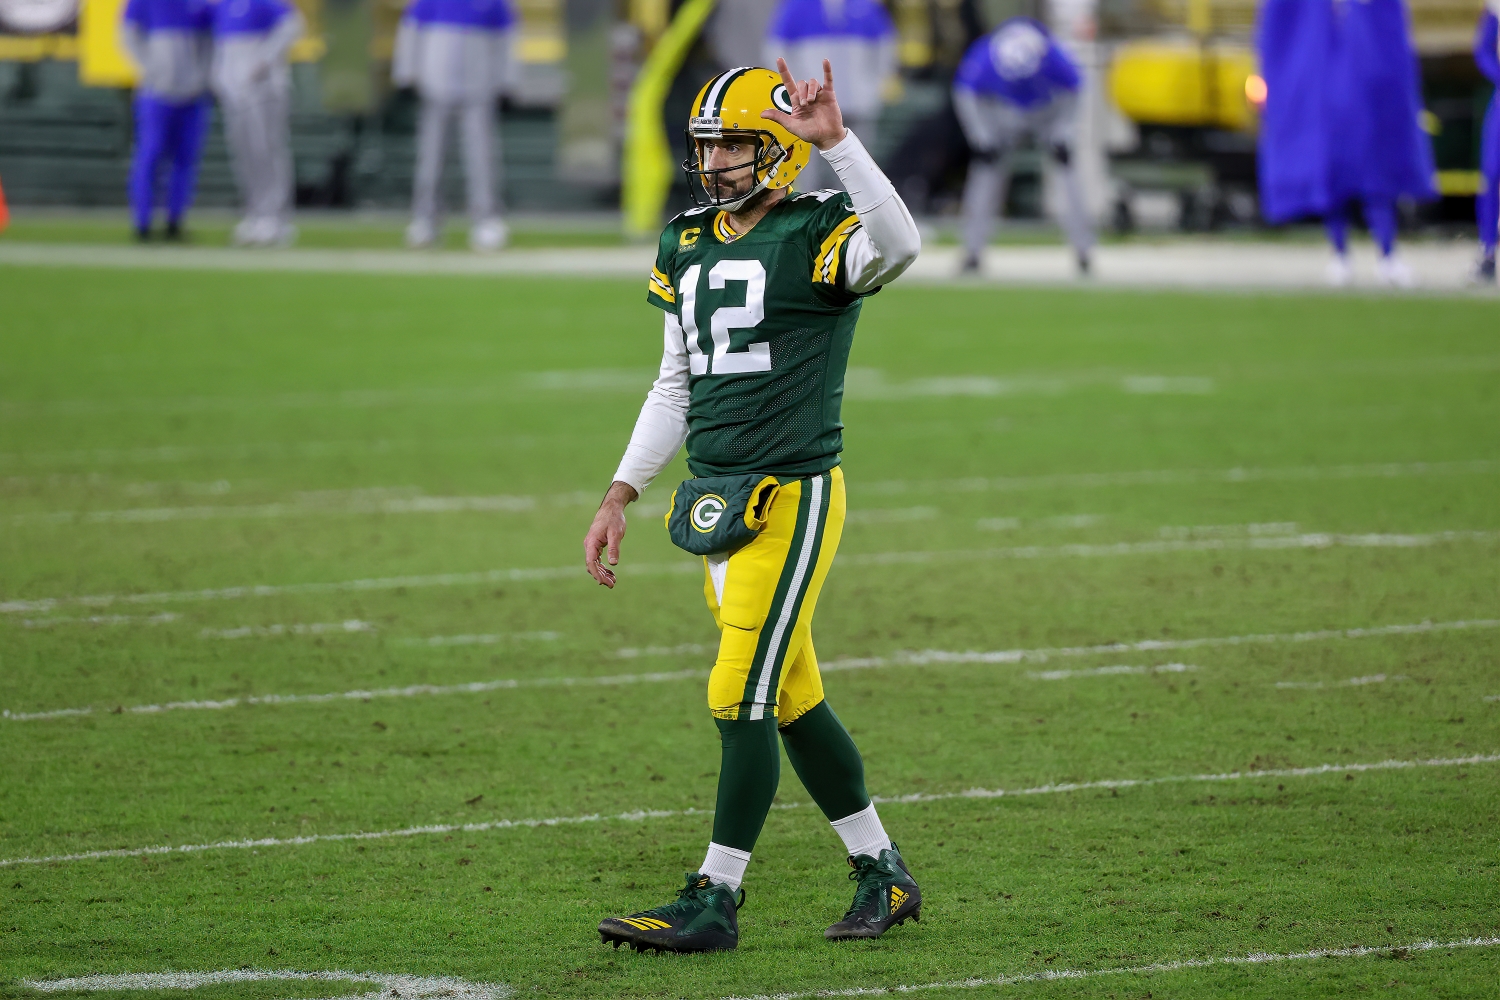 Aaron Rodgers signals to the sideline as he walks off the field.